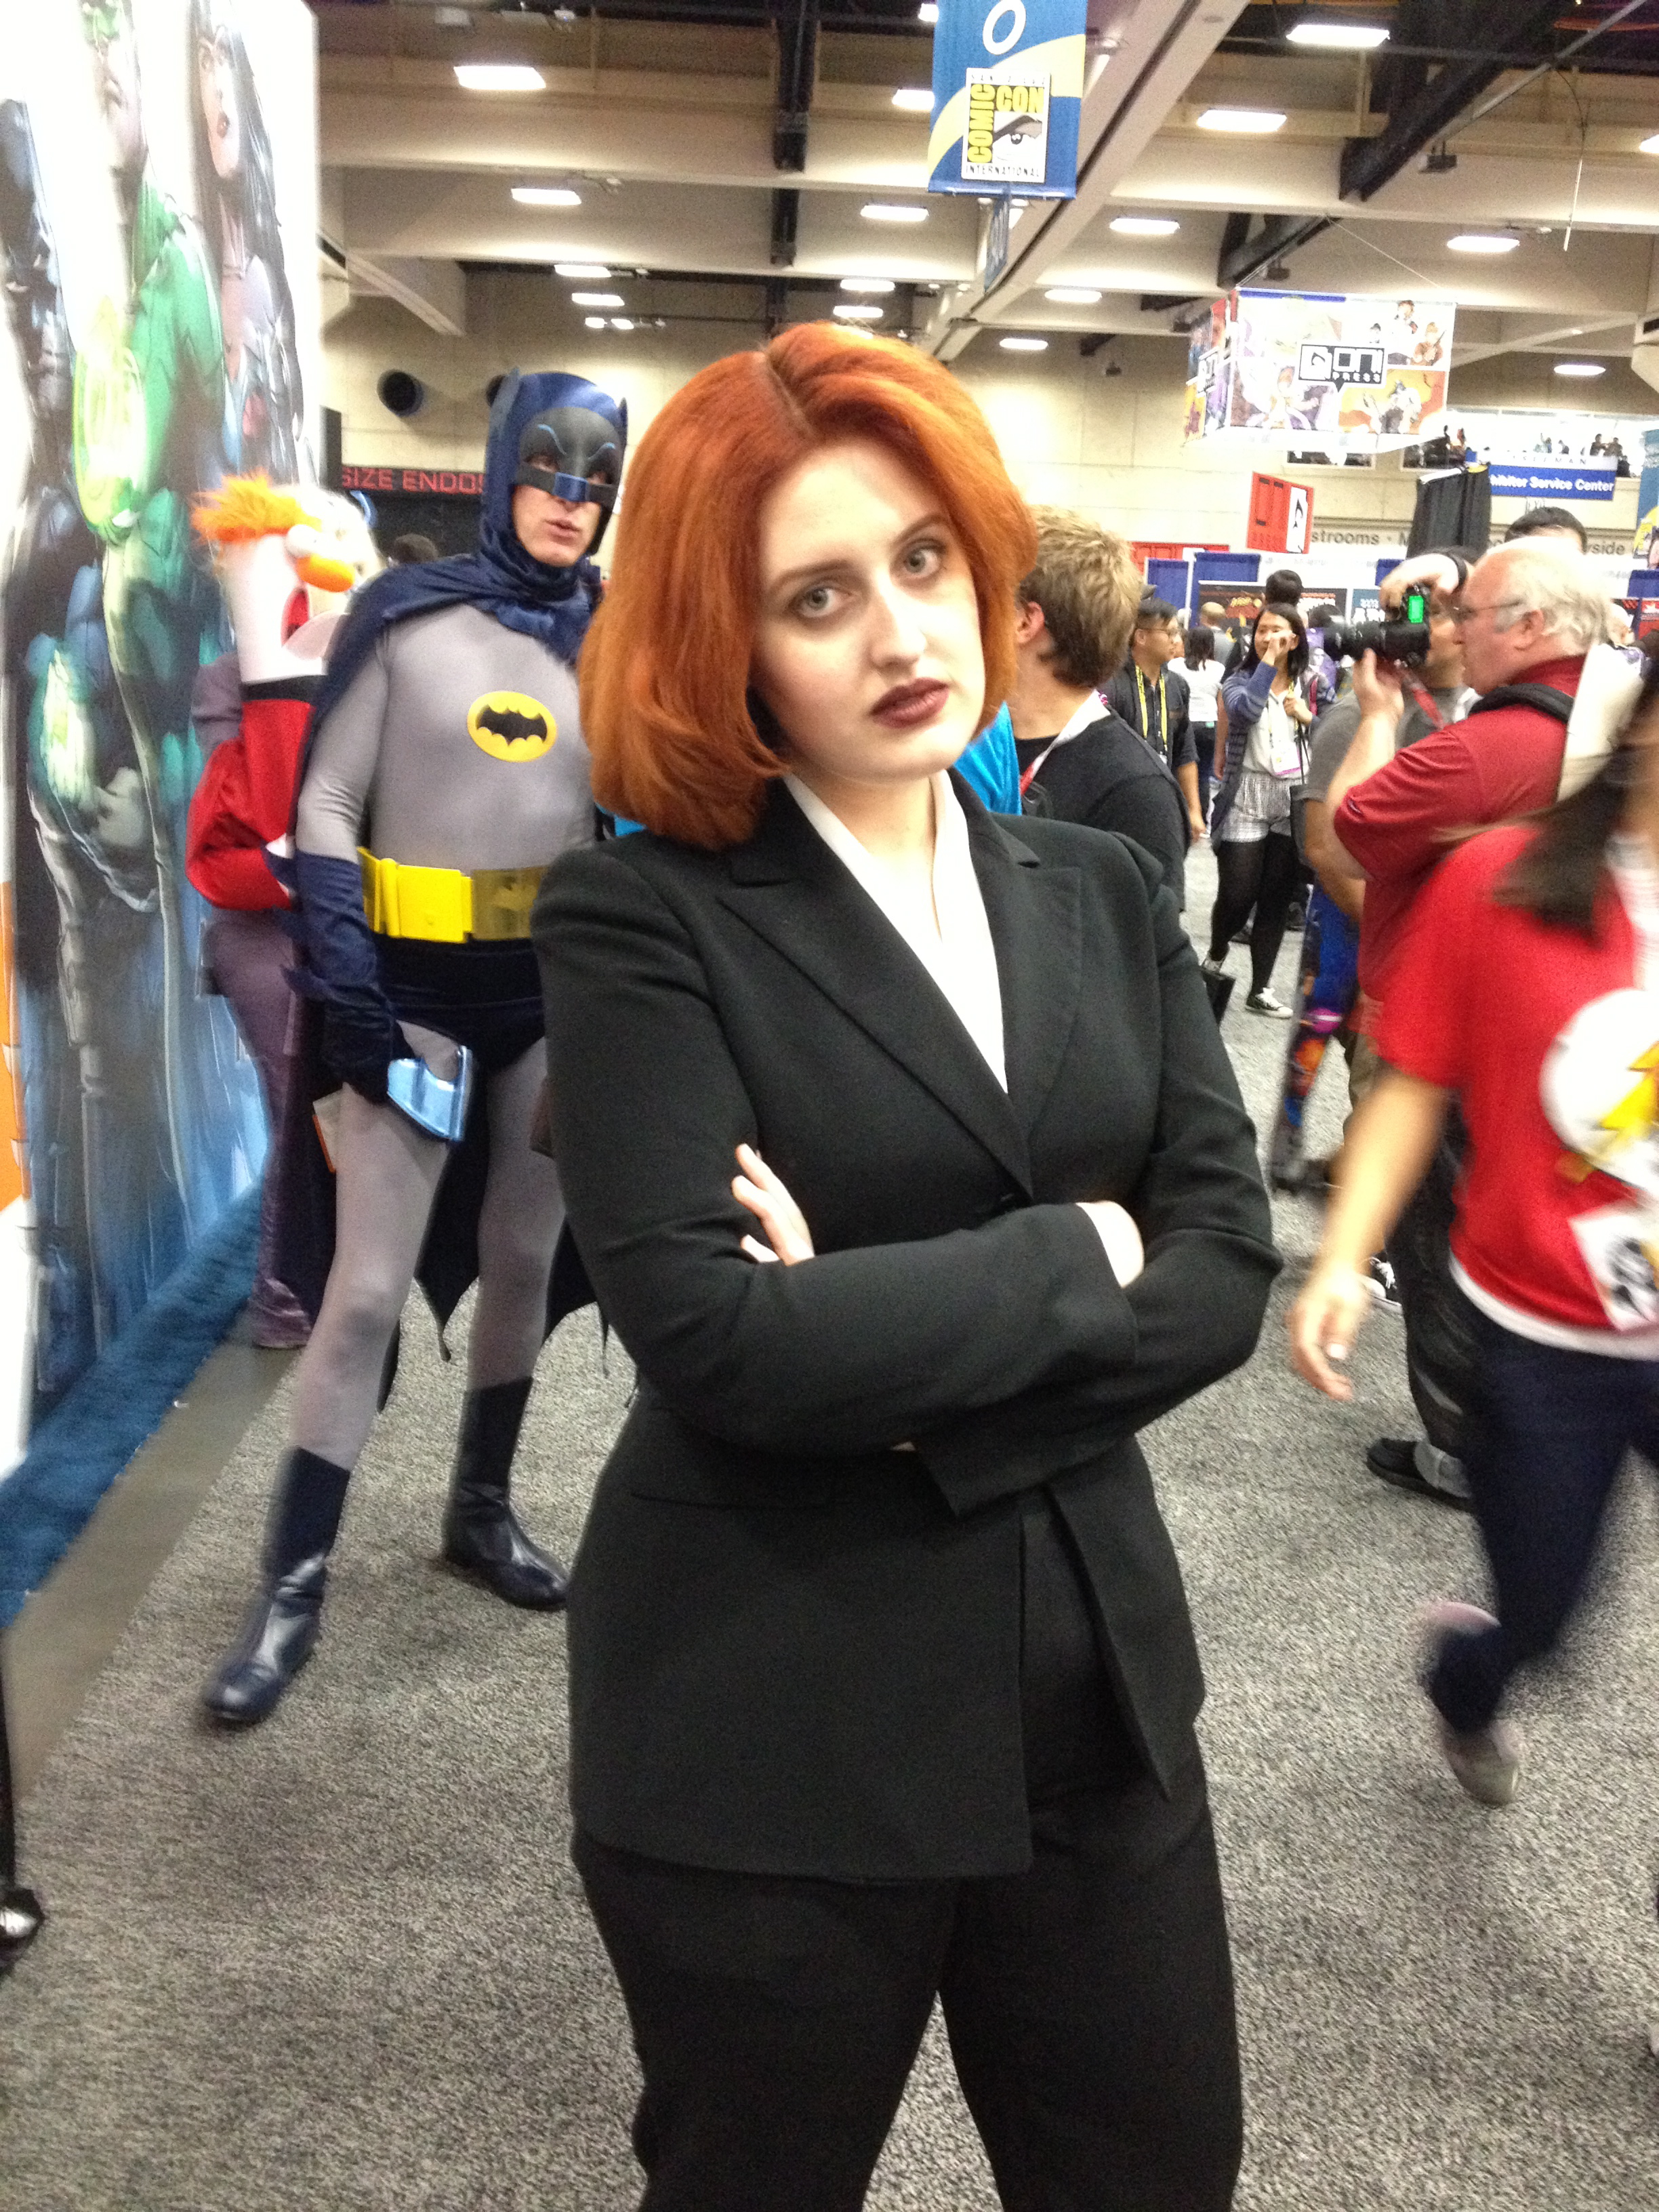 Best Dana Scully cosplay EVAH! 